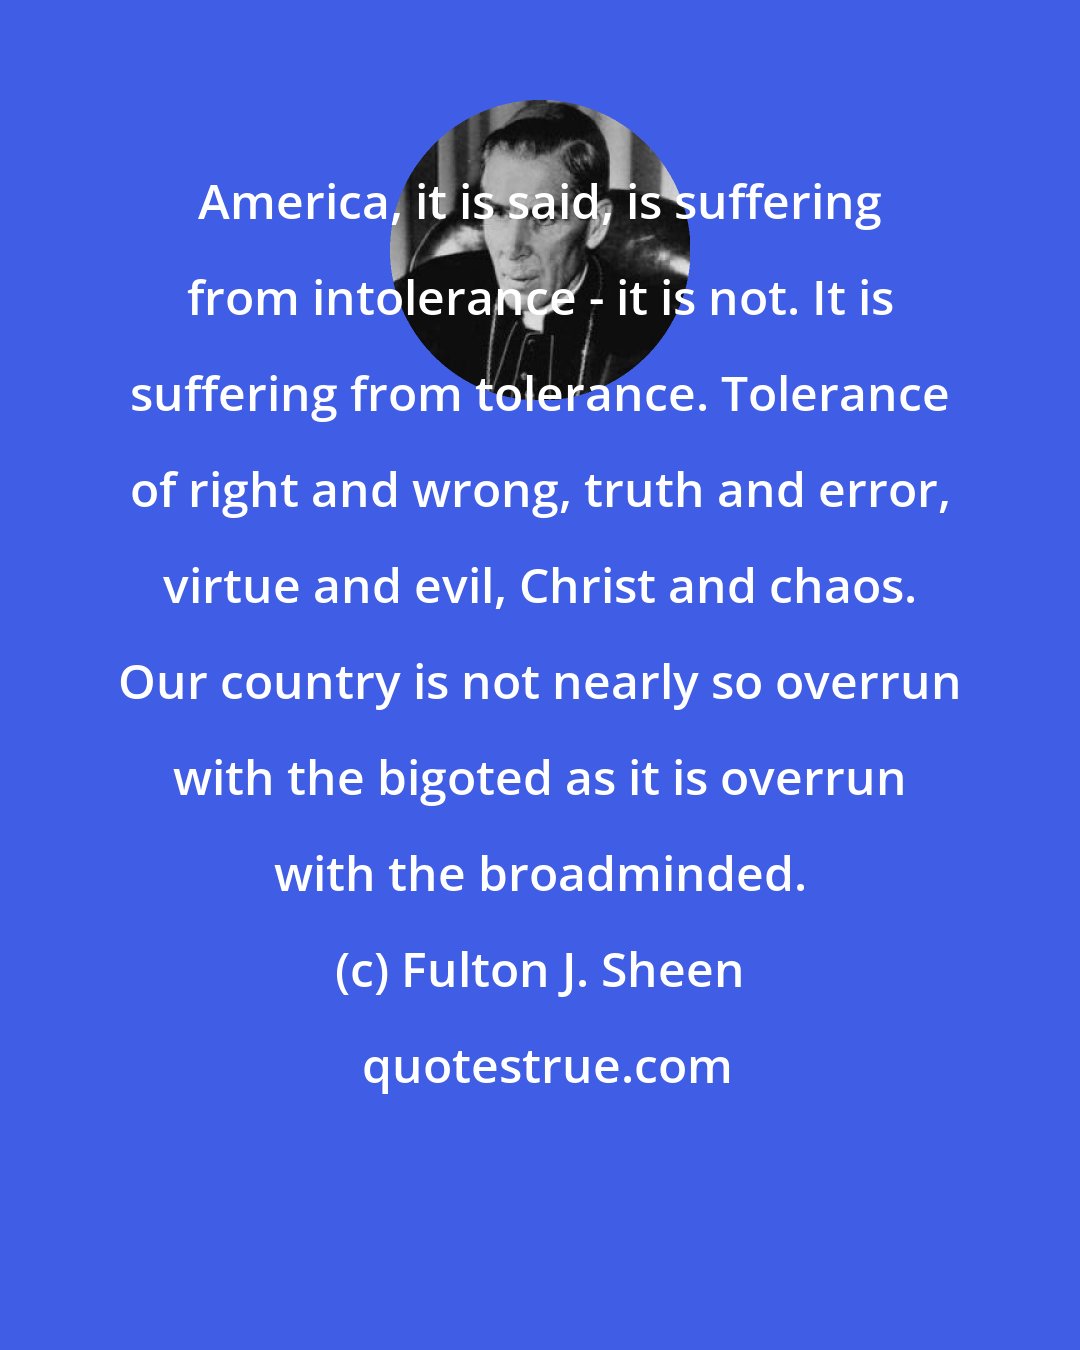 Fulton J. Sheen: America, it is said, is suffering from intolerance - it is not. It is suffering from tolerance. Tolerance of right and wrong, truth and error, virtue and evil, Christ and chaos. Our country is not nearly so overrun with the bigoted as it is overrun with the broadminded.